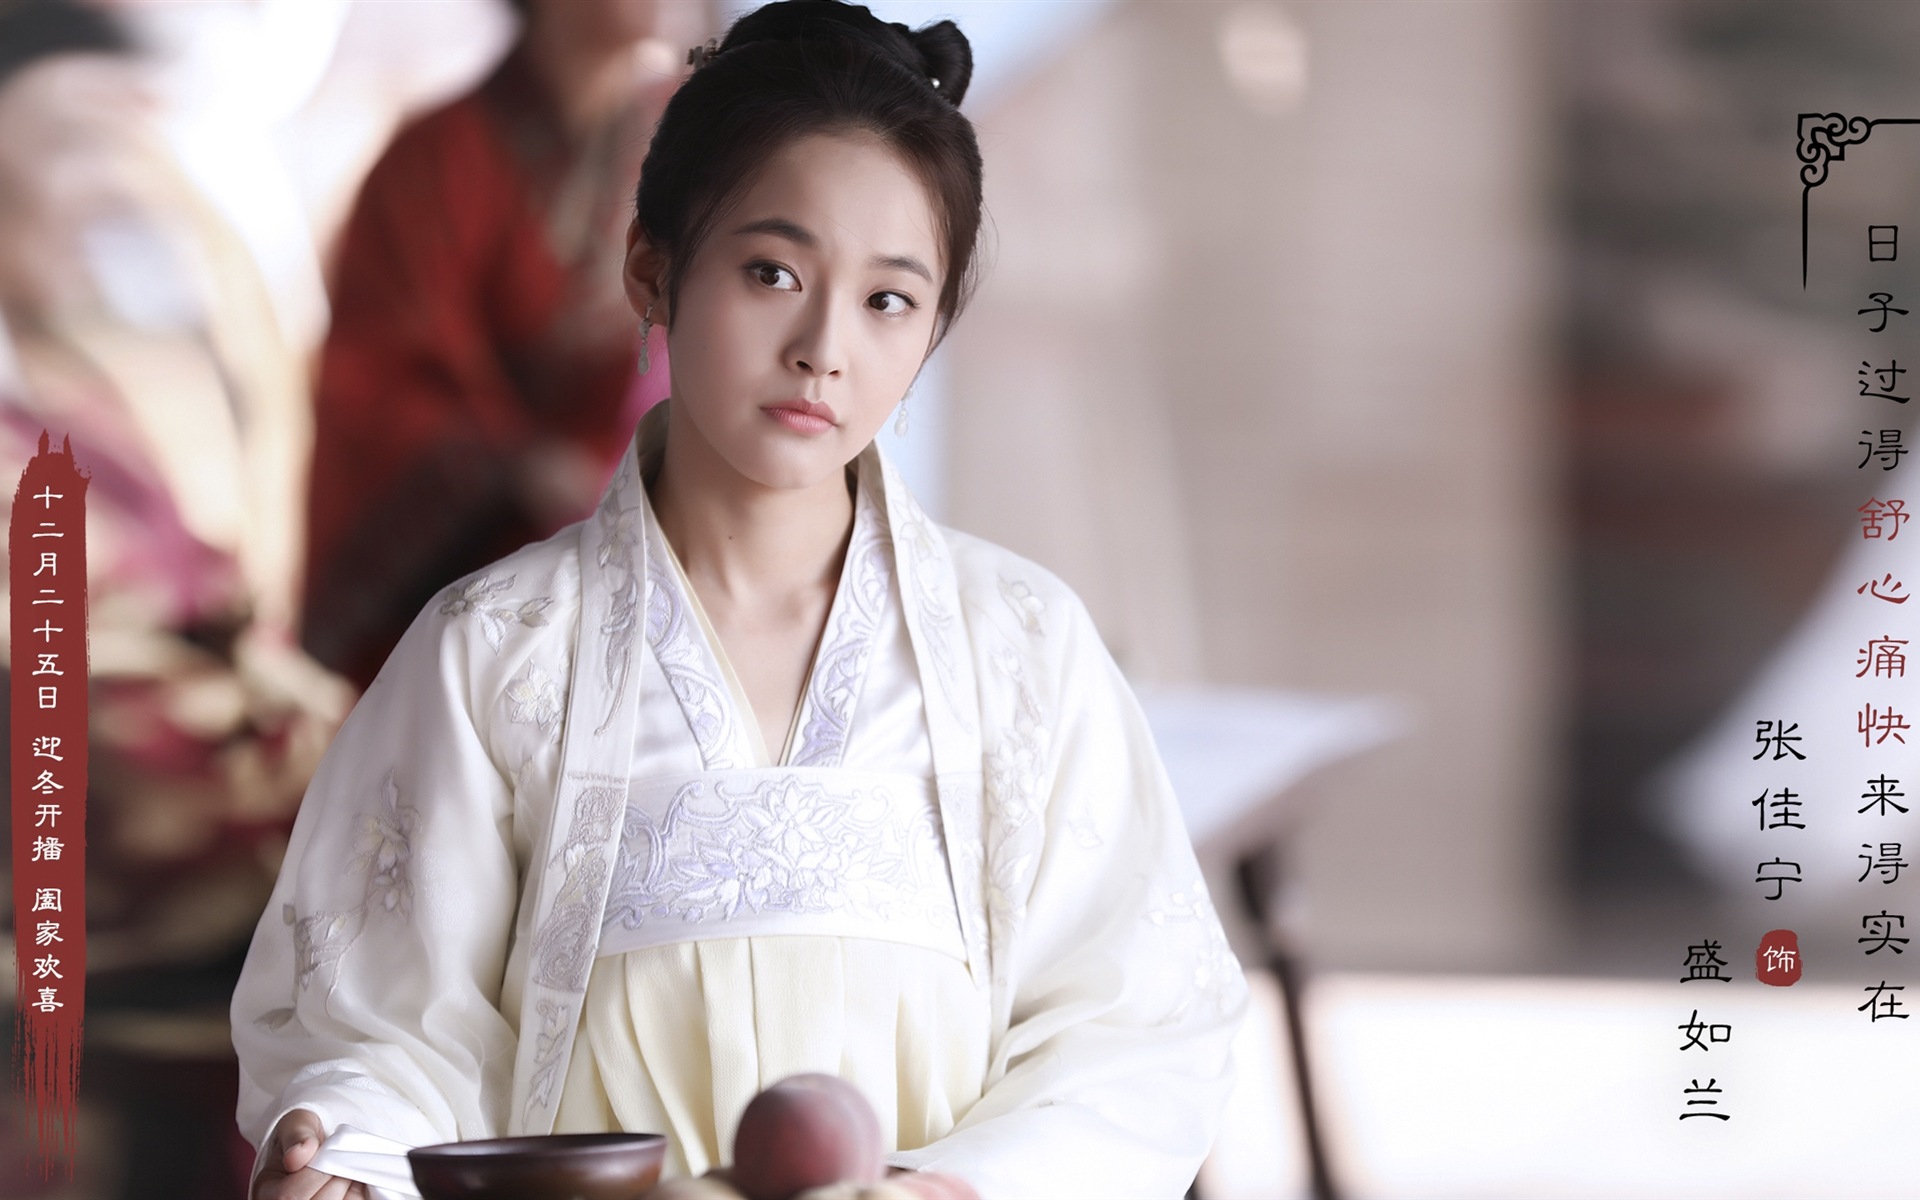 The Story Of MingLan, TV series HD wallpapers #33 - 1920x1200